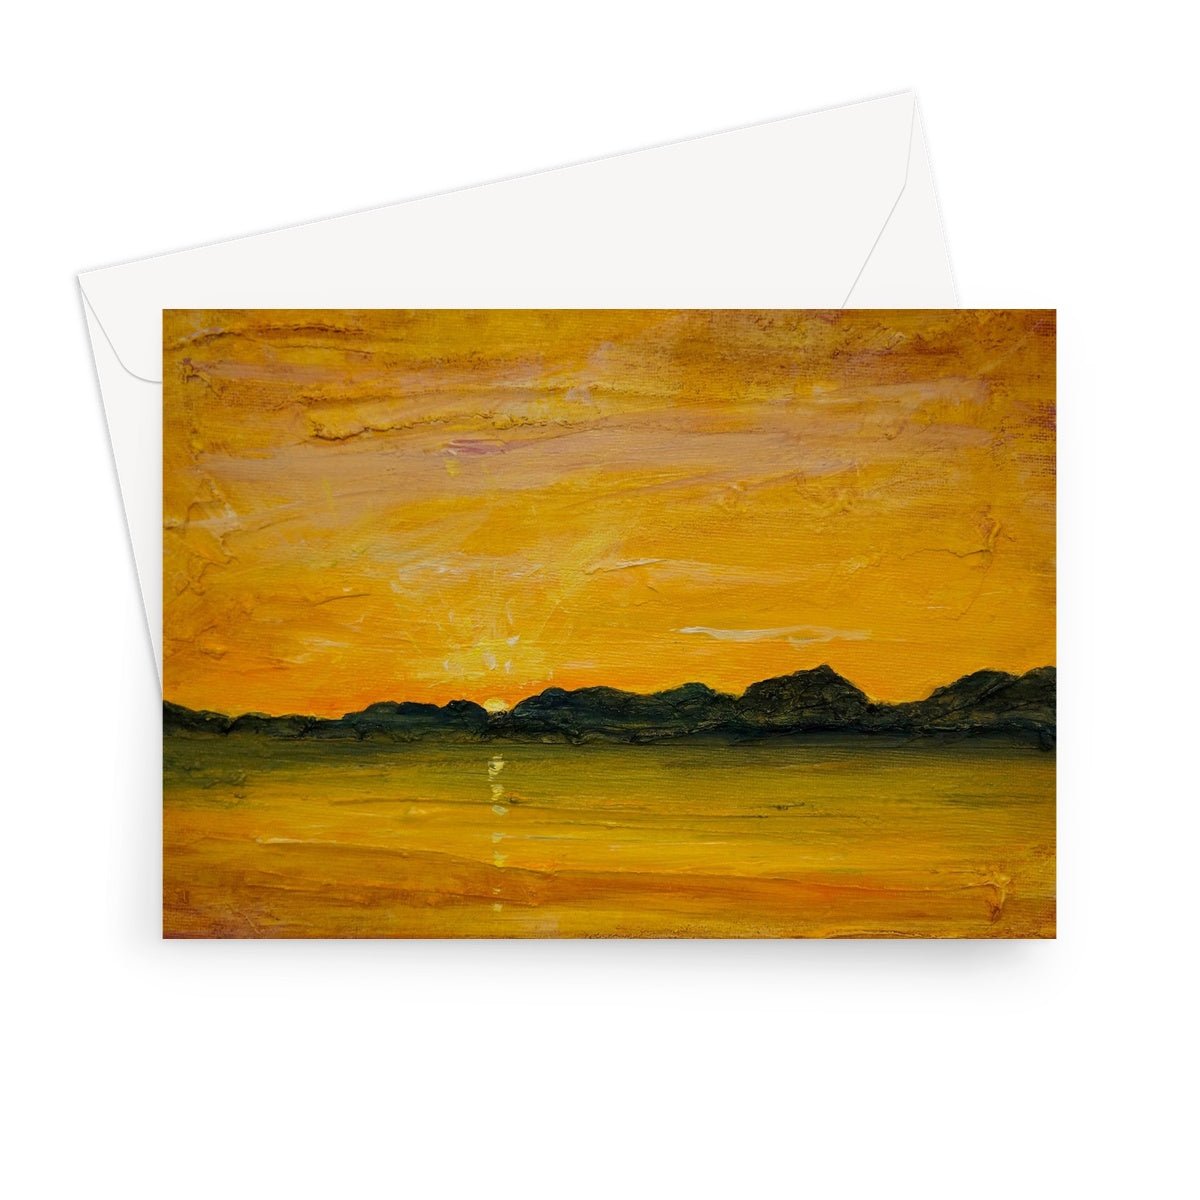 Jura Sunset Art Gifts Greeting Card-Greetings Cards-Hebridean Islands Art Gallery-7"x5"-10 Cards-Paintings, Prints, Homeware, Art Gifts From Scotland By Scottish Artist Kevin Hunter